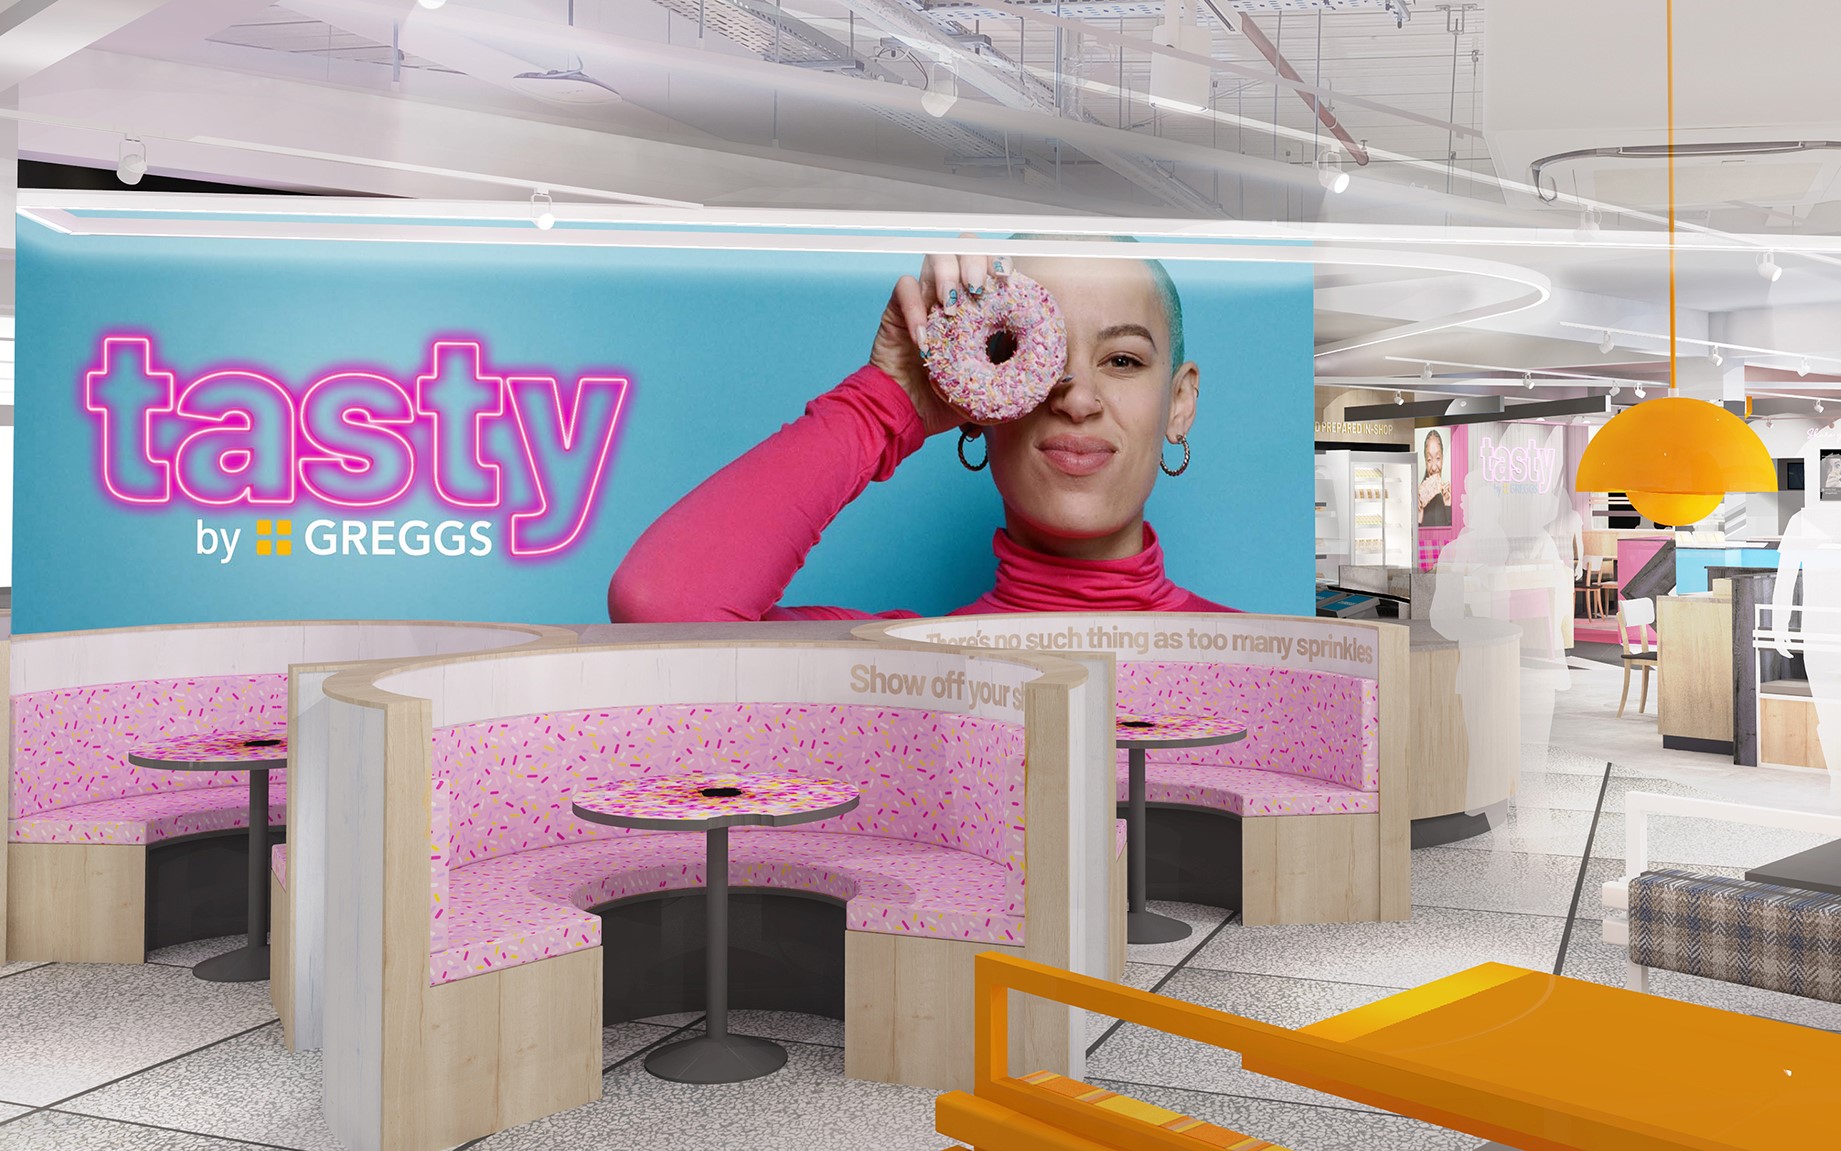 The Tasty by Greggs cafe. (Greggs/Primark/PA)